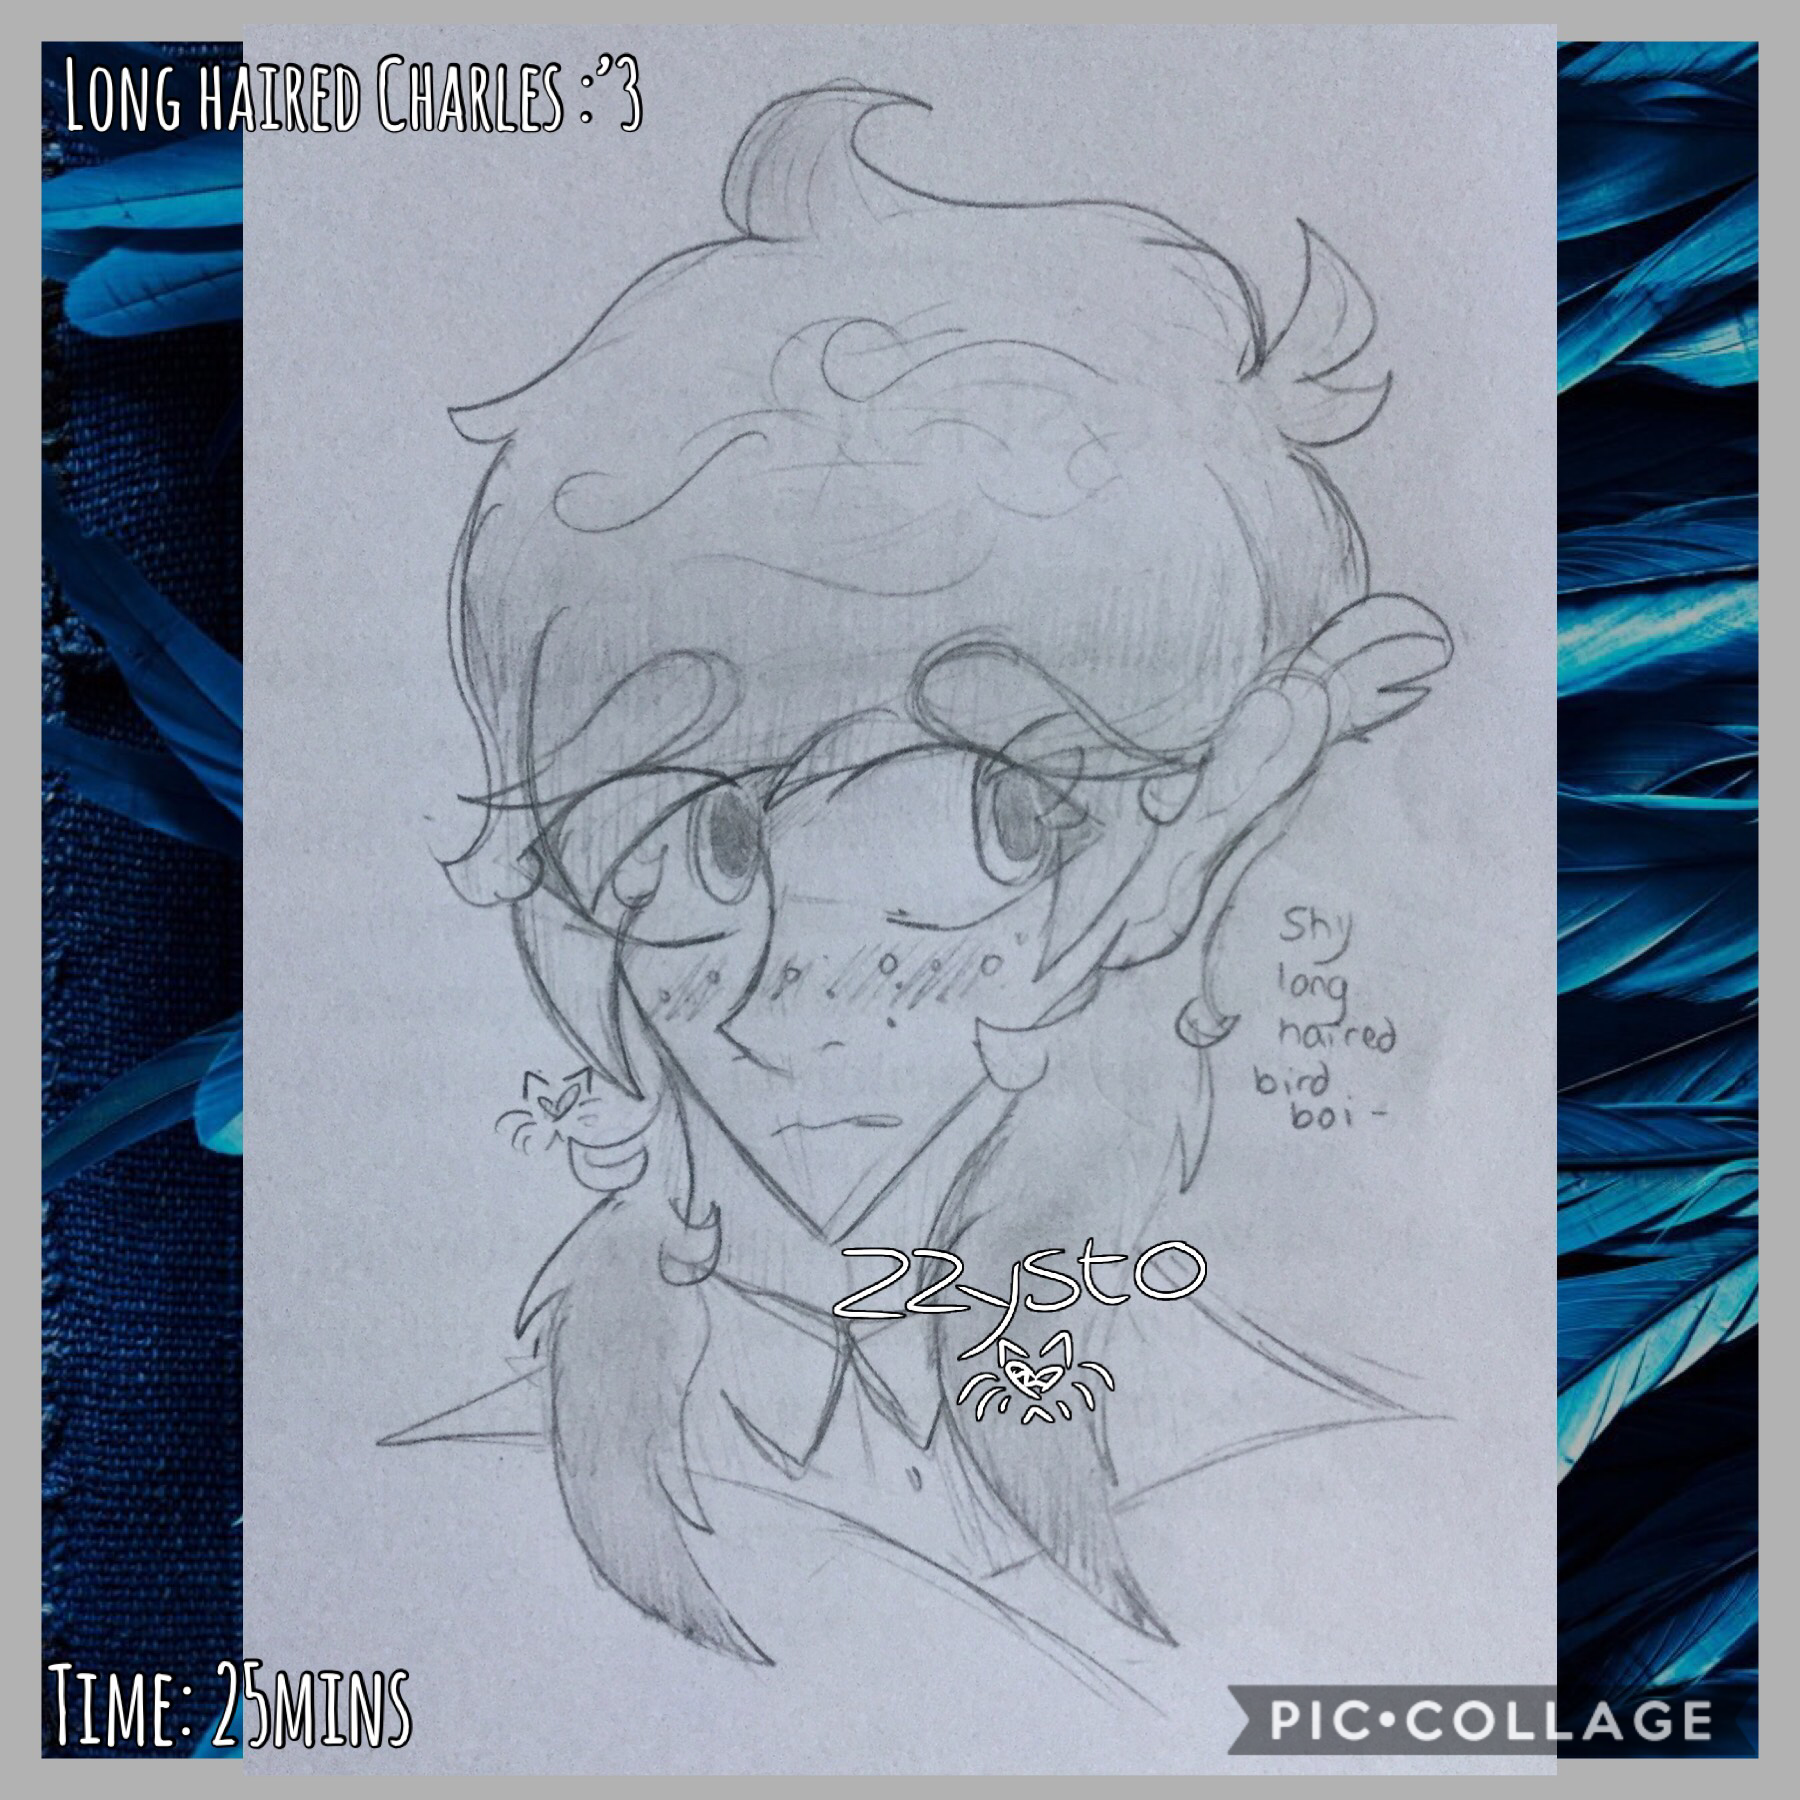 🕊Tap🕊
I can’t remember why I thought to do this, but he’s pretty shy about it úwù
Also, I can’t draw long hair which is why I don’t draw females often *dab*
I definitely didn’t draw this on the back of some English classwork, haha- q-q”